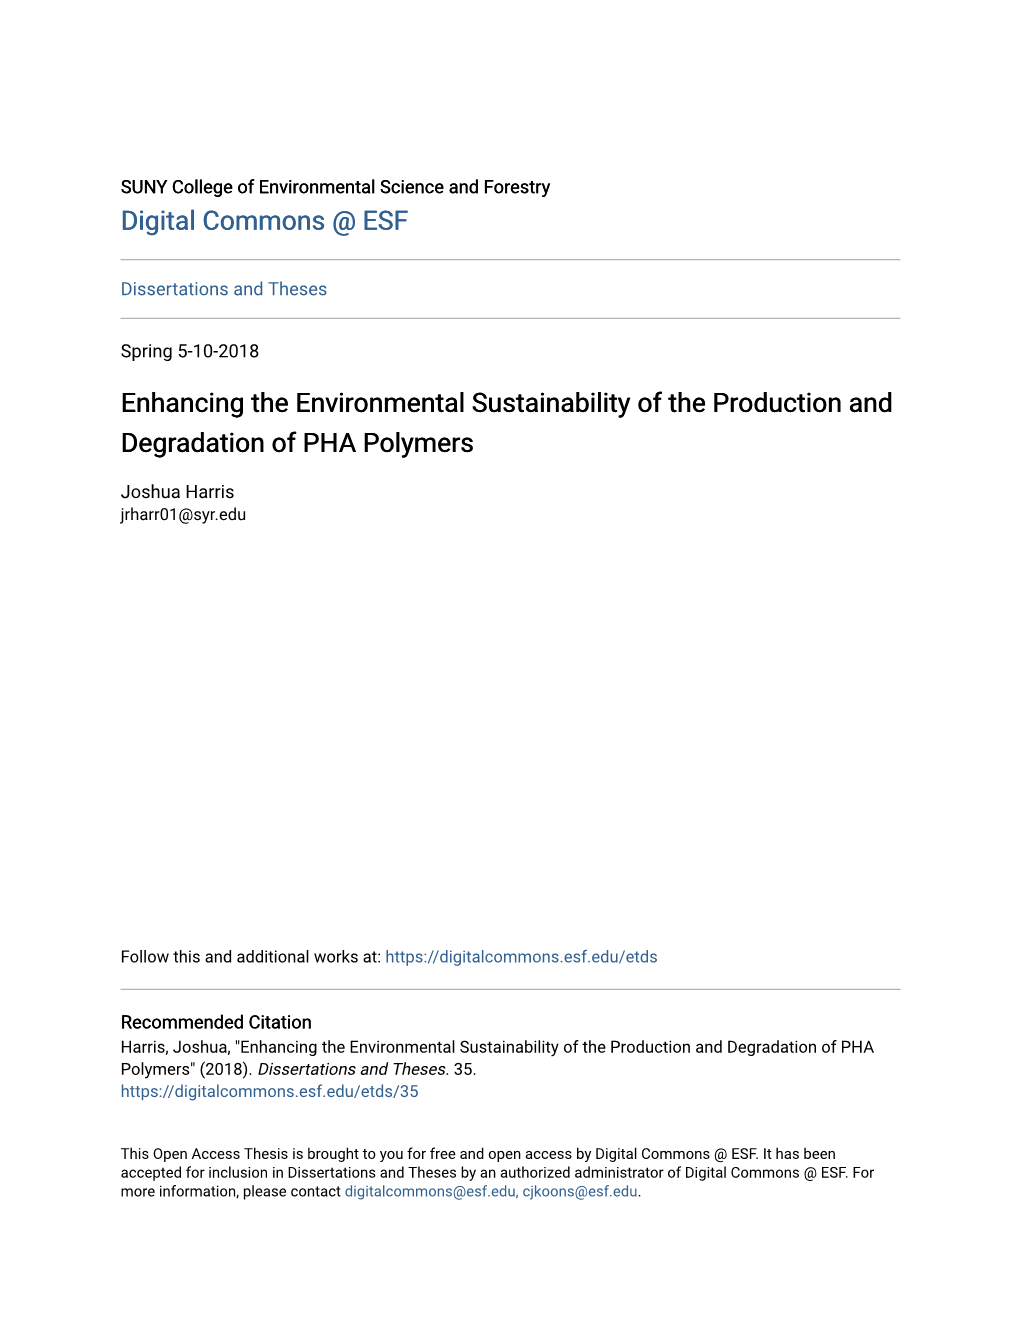 Enhancing the Environmental Sustainability of the Production and Degradation of PHA Polymers